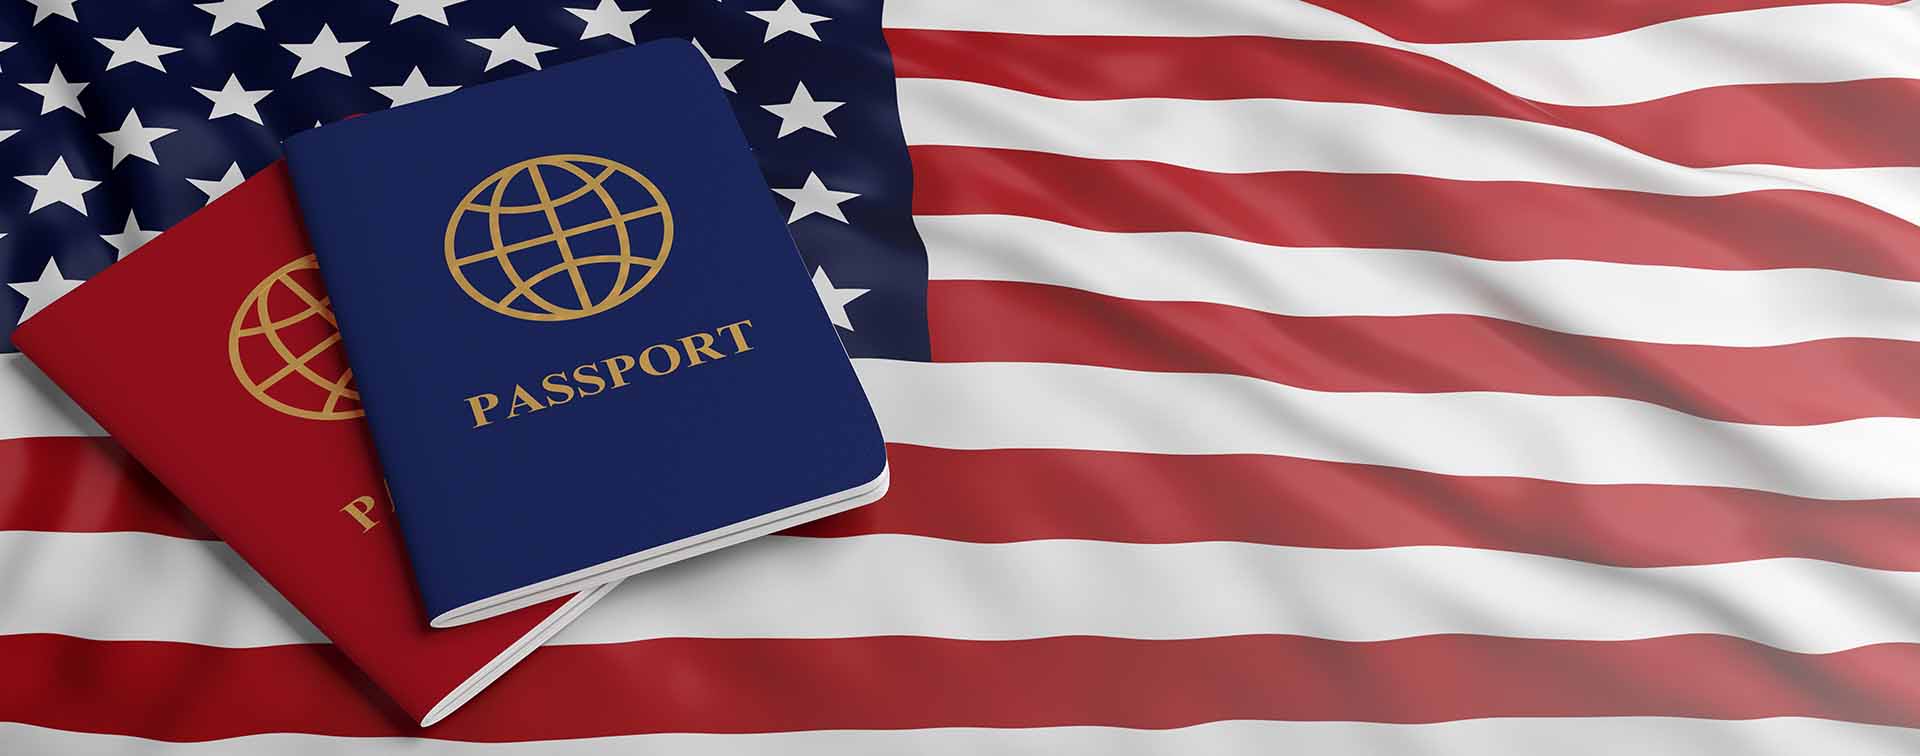 Two passports, one red one blue, on USA flag background. 3D illustration